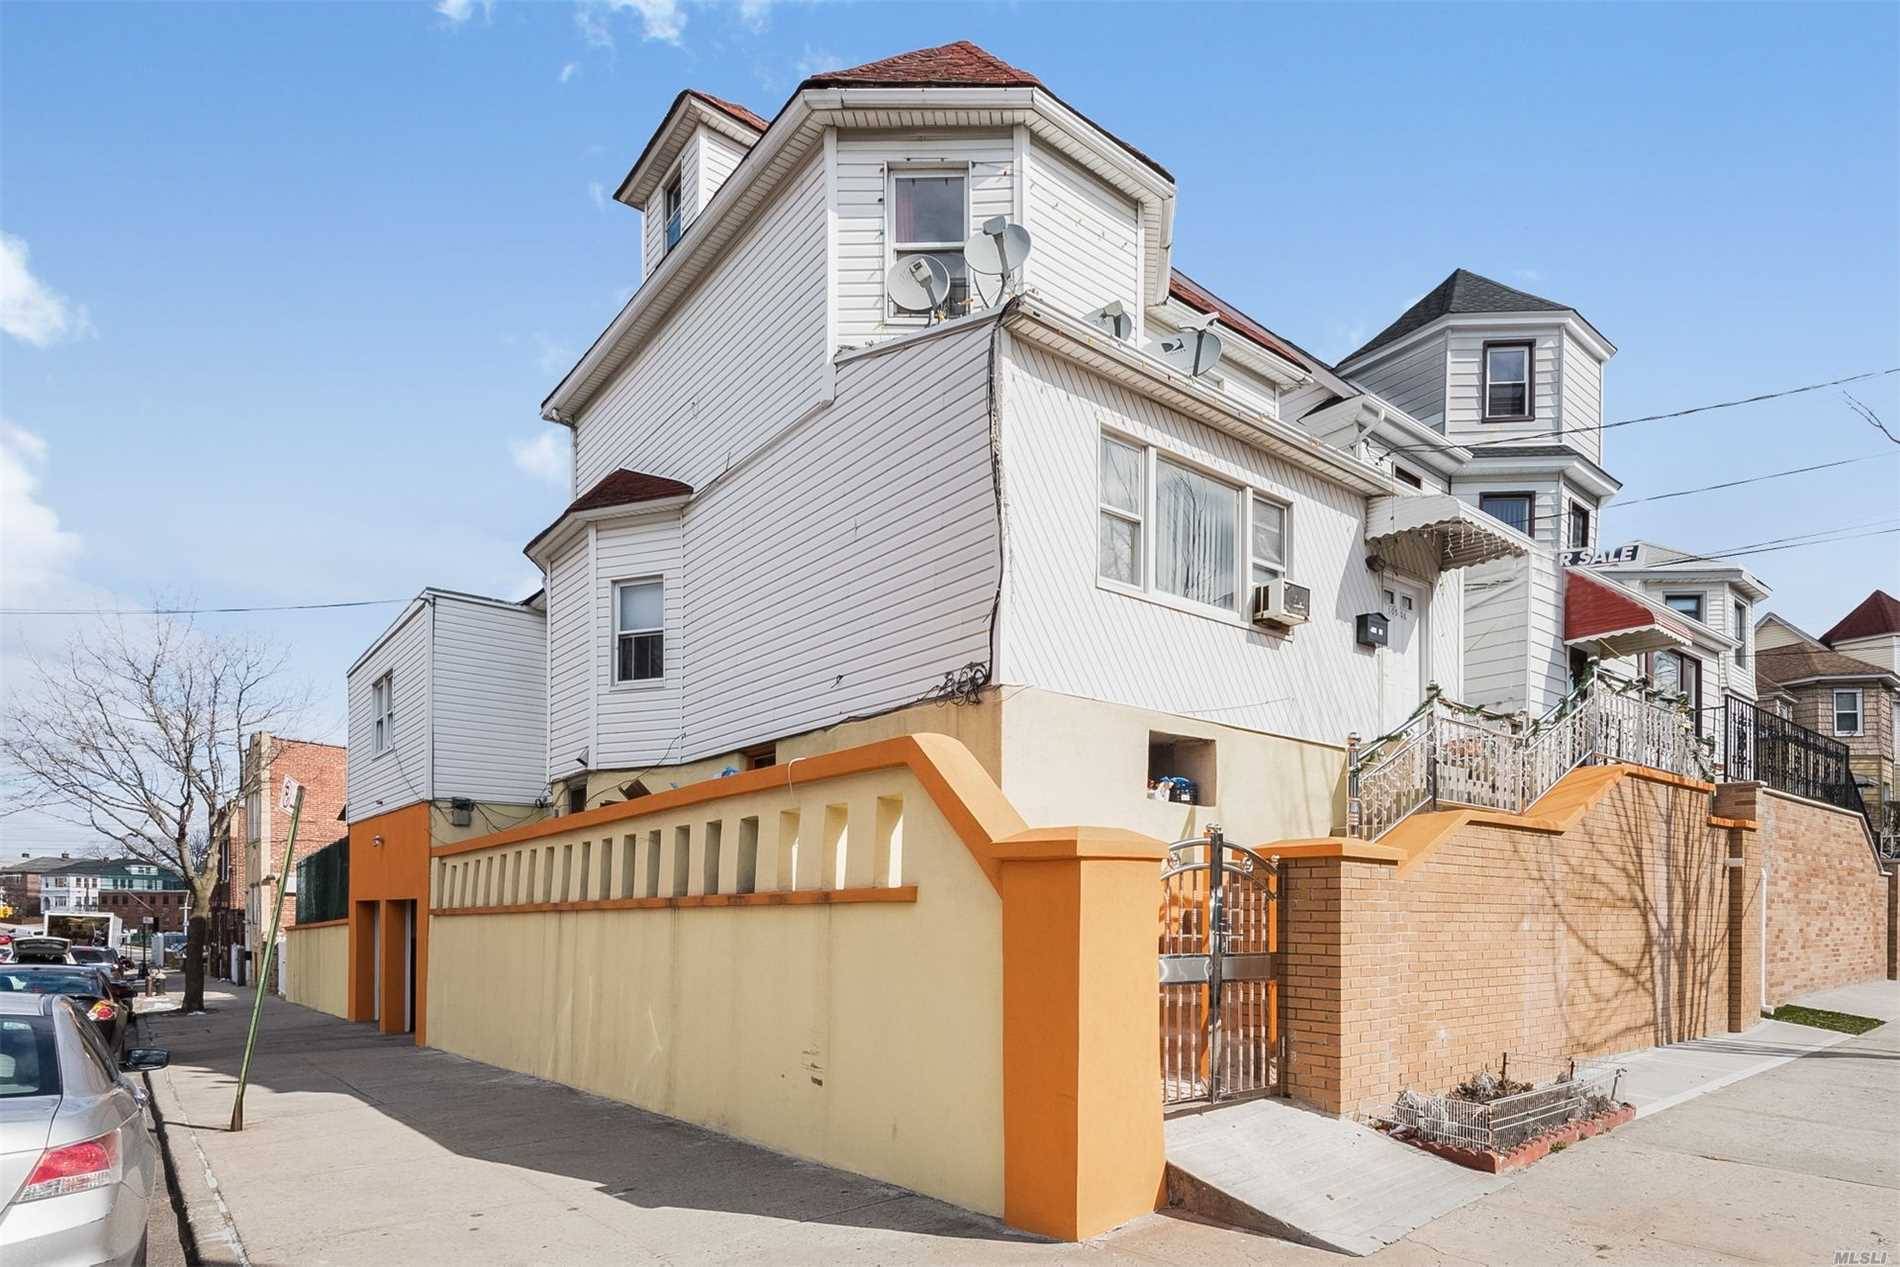 Stylish Multi-Unit Home With An Attached Two-Car Garage Sits On The Corner Of A Quiet Street.